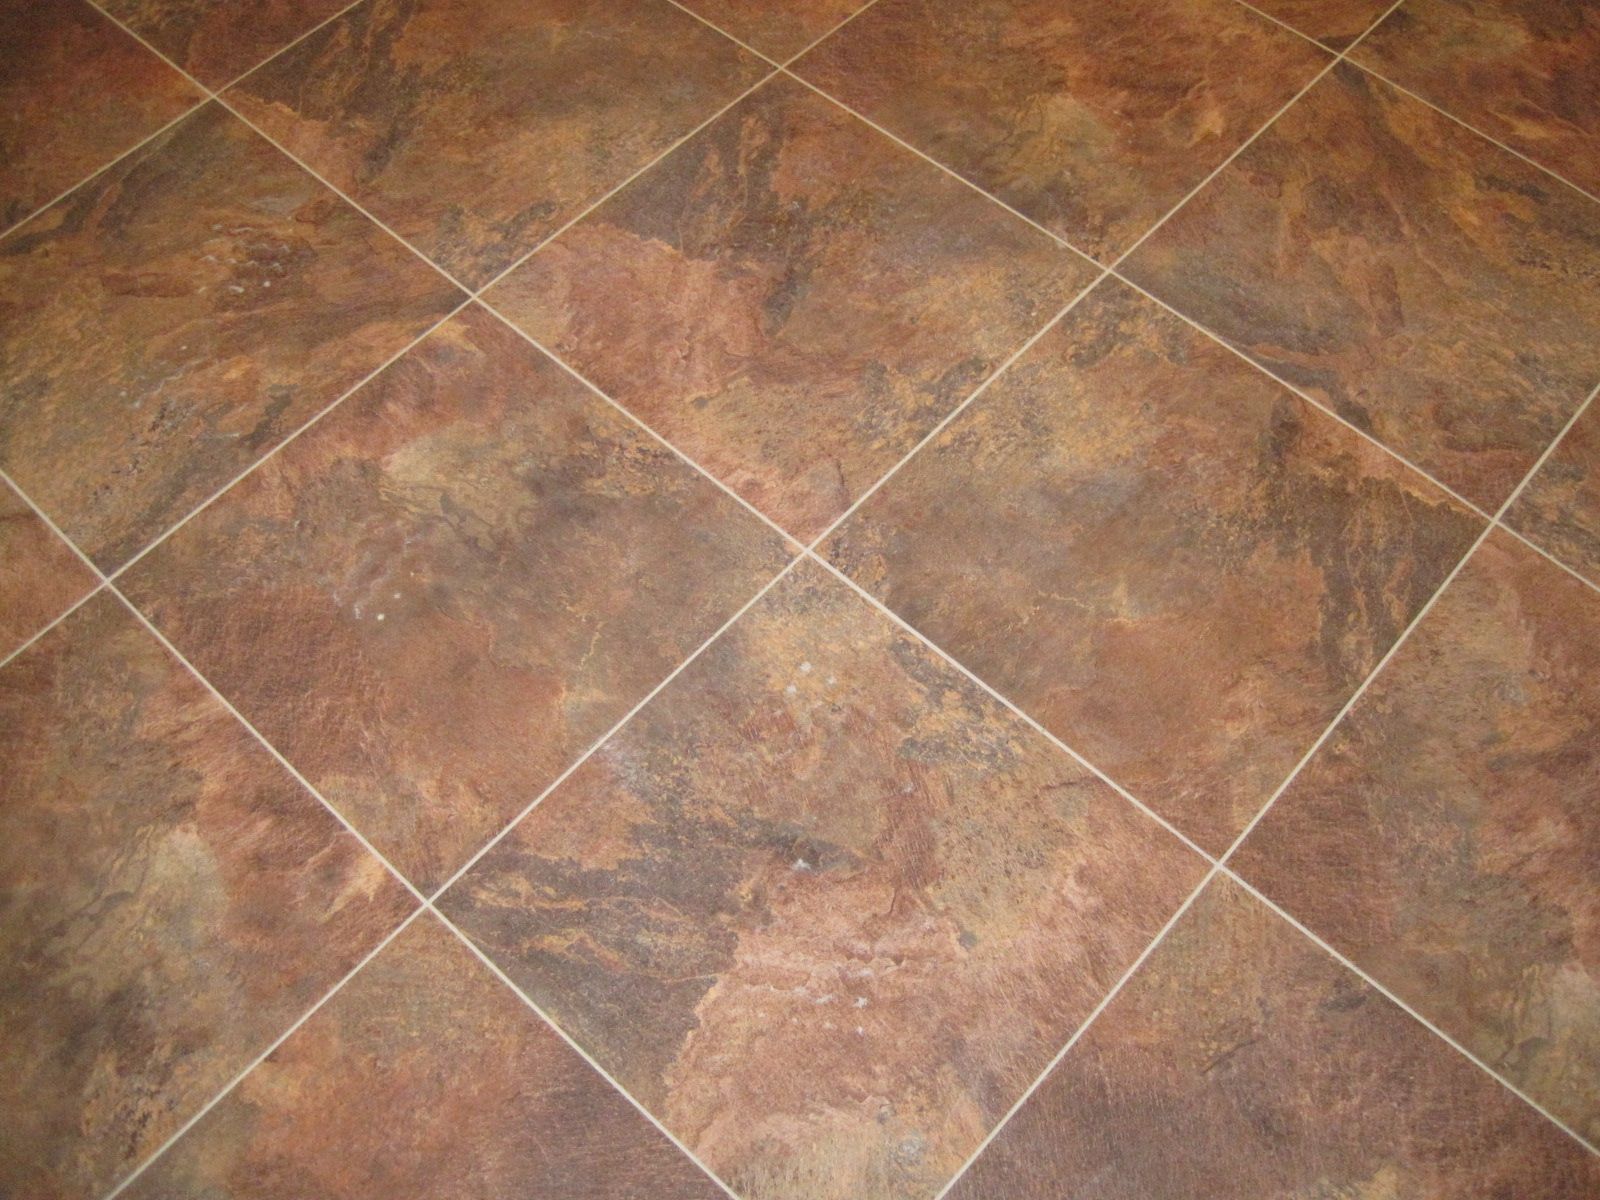 Prescott Valley Tile and Grout. After Holiday Tile Cleaning